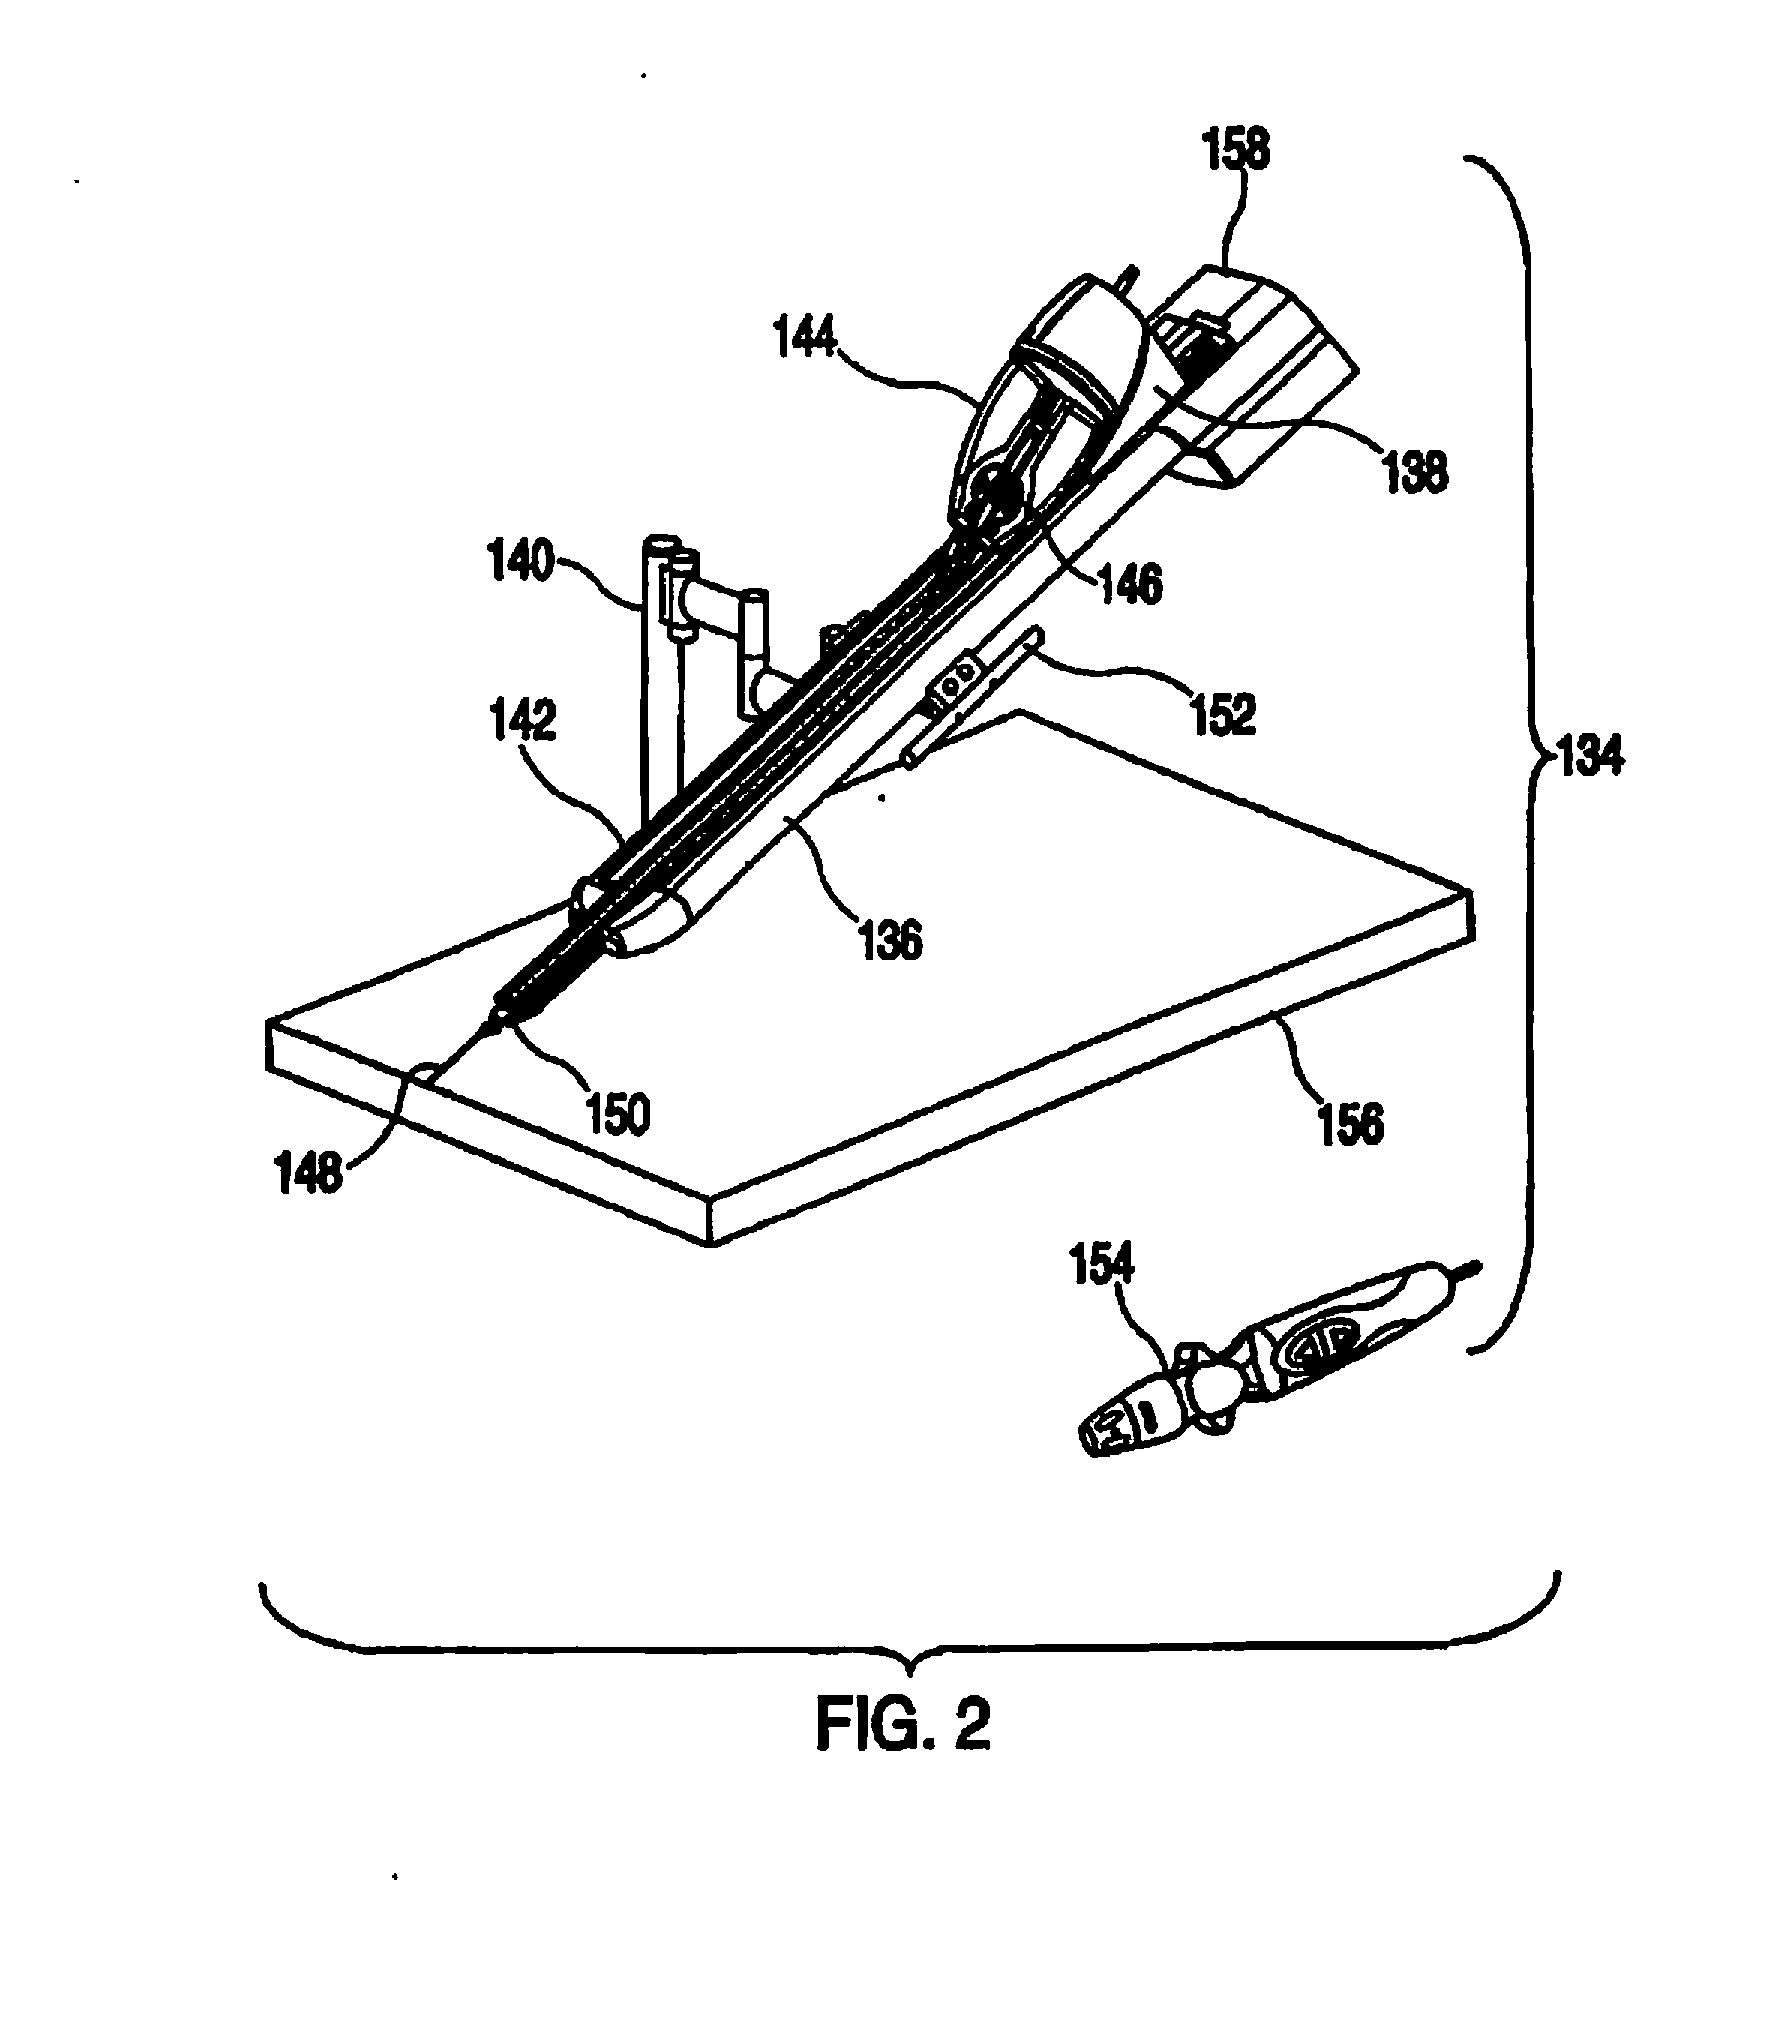 Remotely Controlled Catheter Insertion System with Automatic Control System